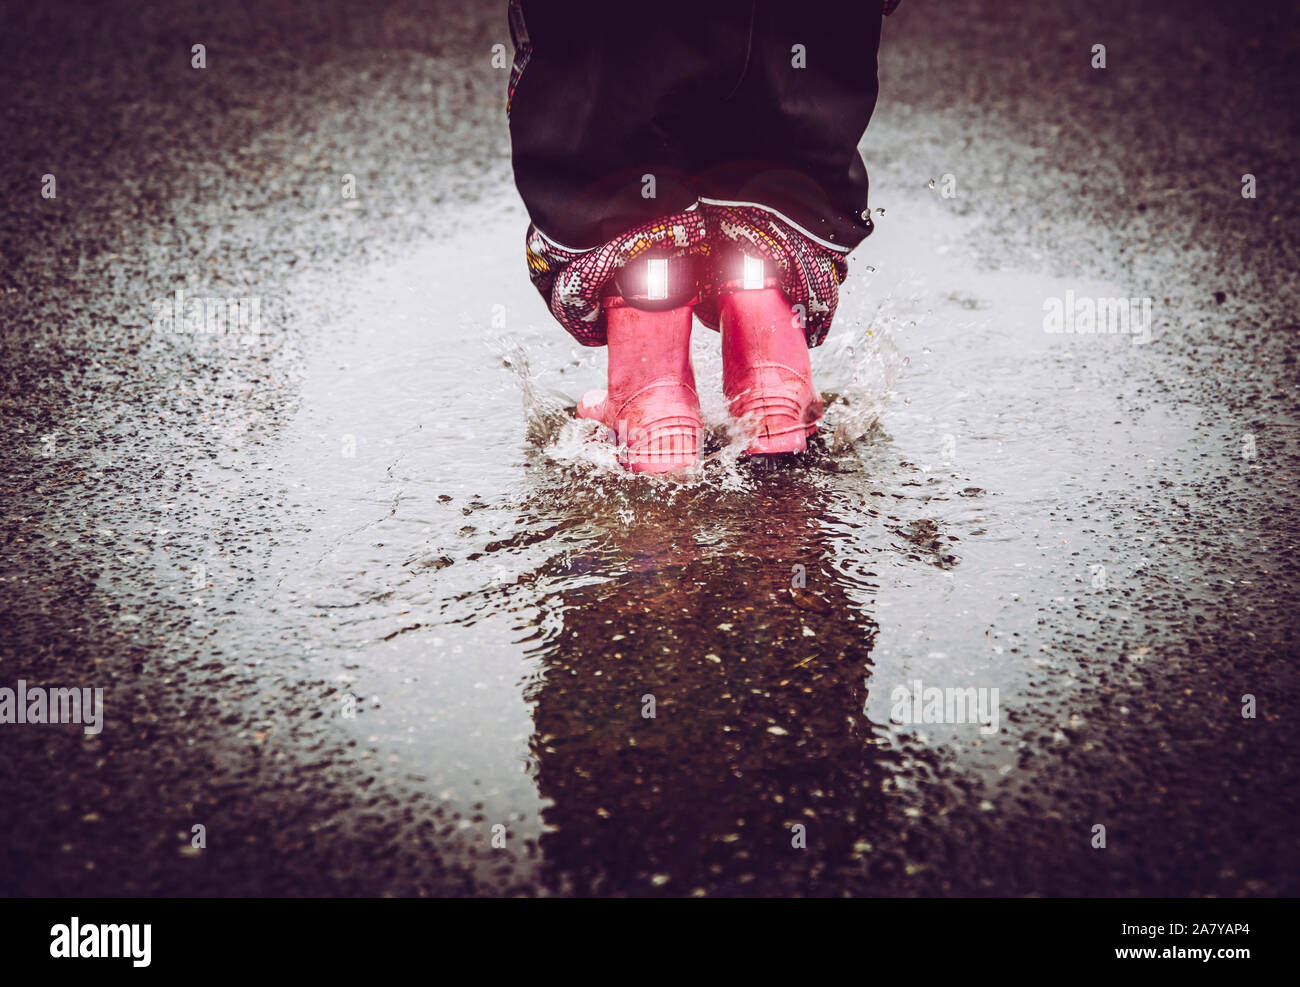 Girl having fun, jumping in water puddle on wet street, wearing rain boots with reflective detail fabric stripes shining. High visibility and safety i Stock Photo